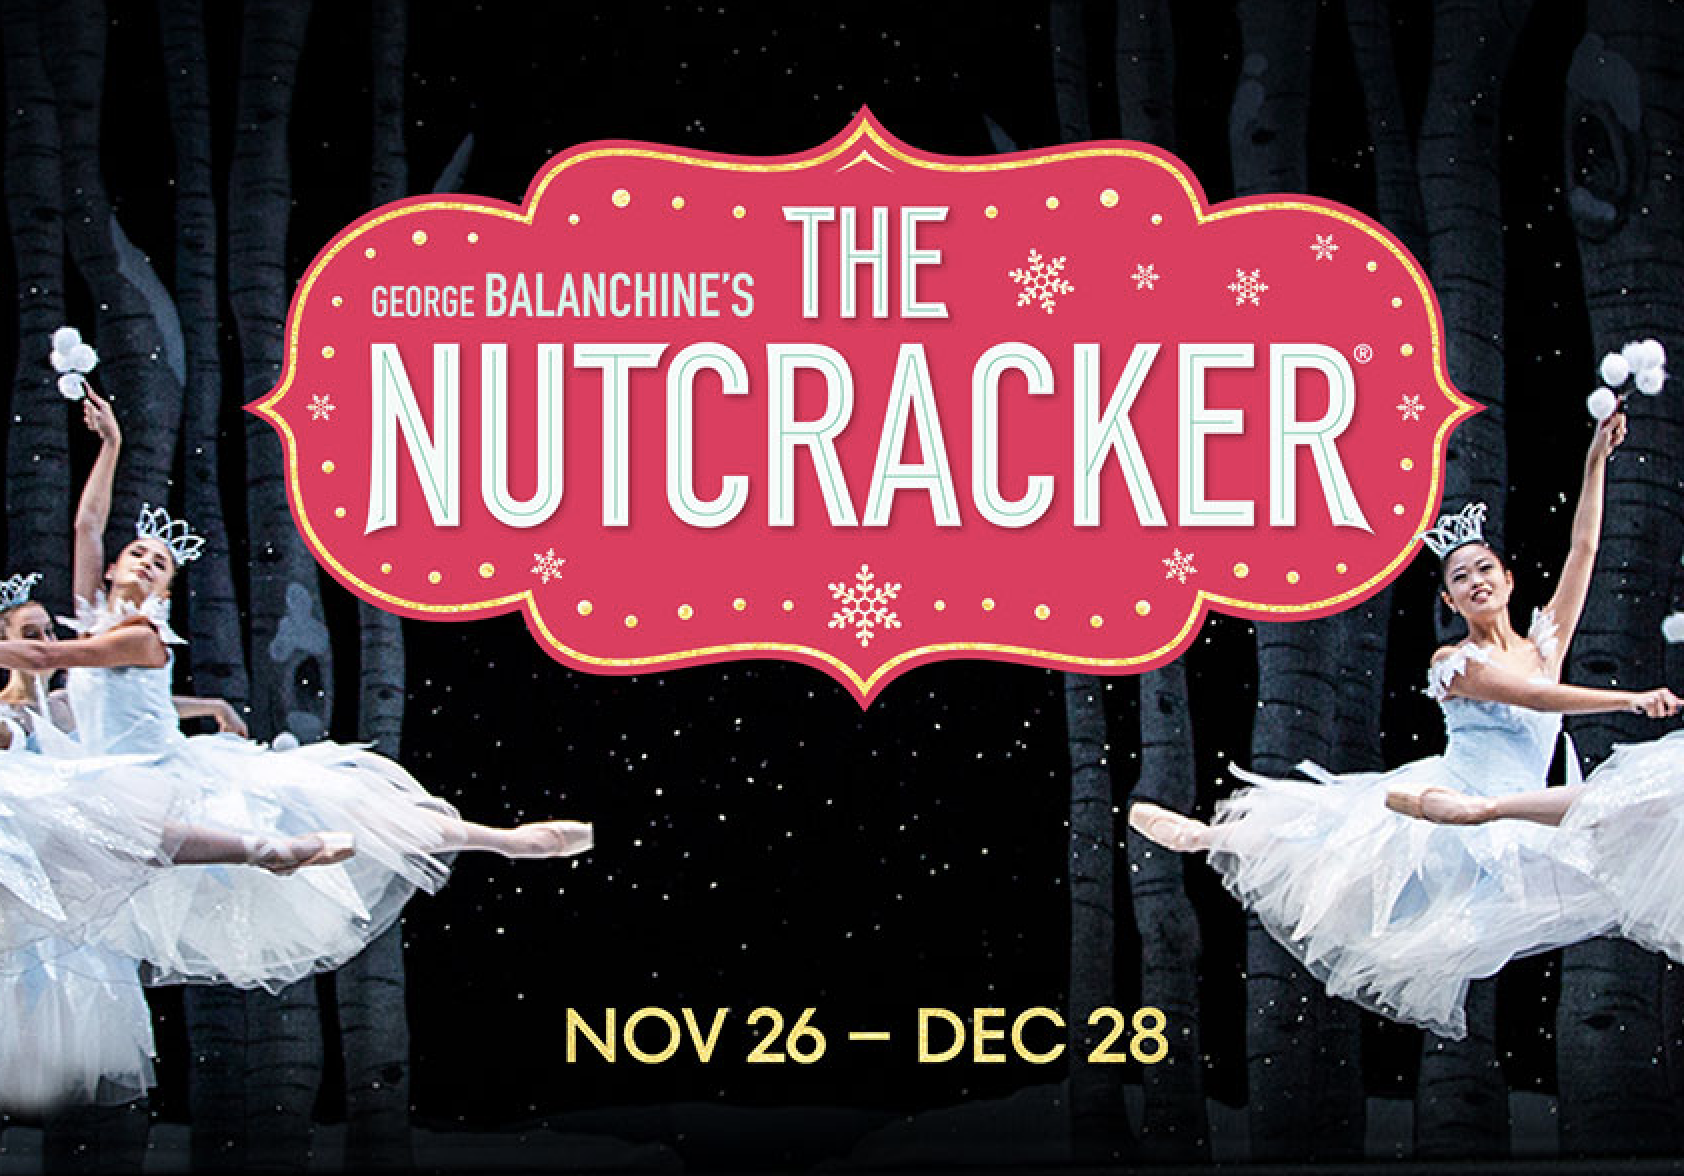 A digital sign for PNB's Nutcracker with dancers in the background and a red seal